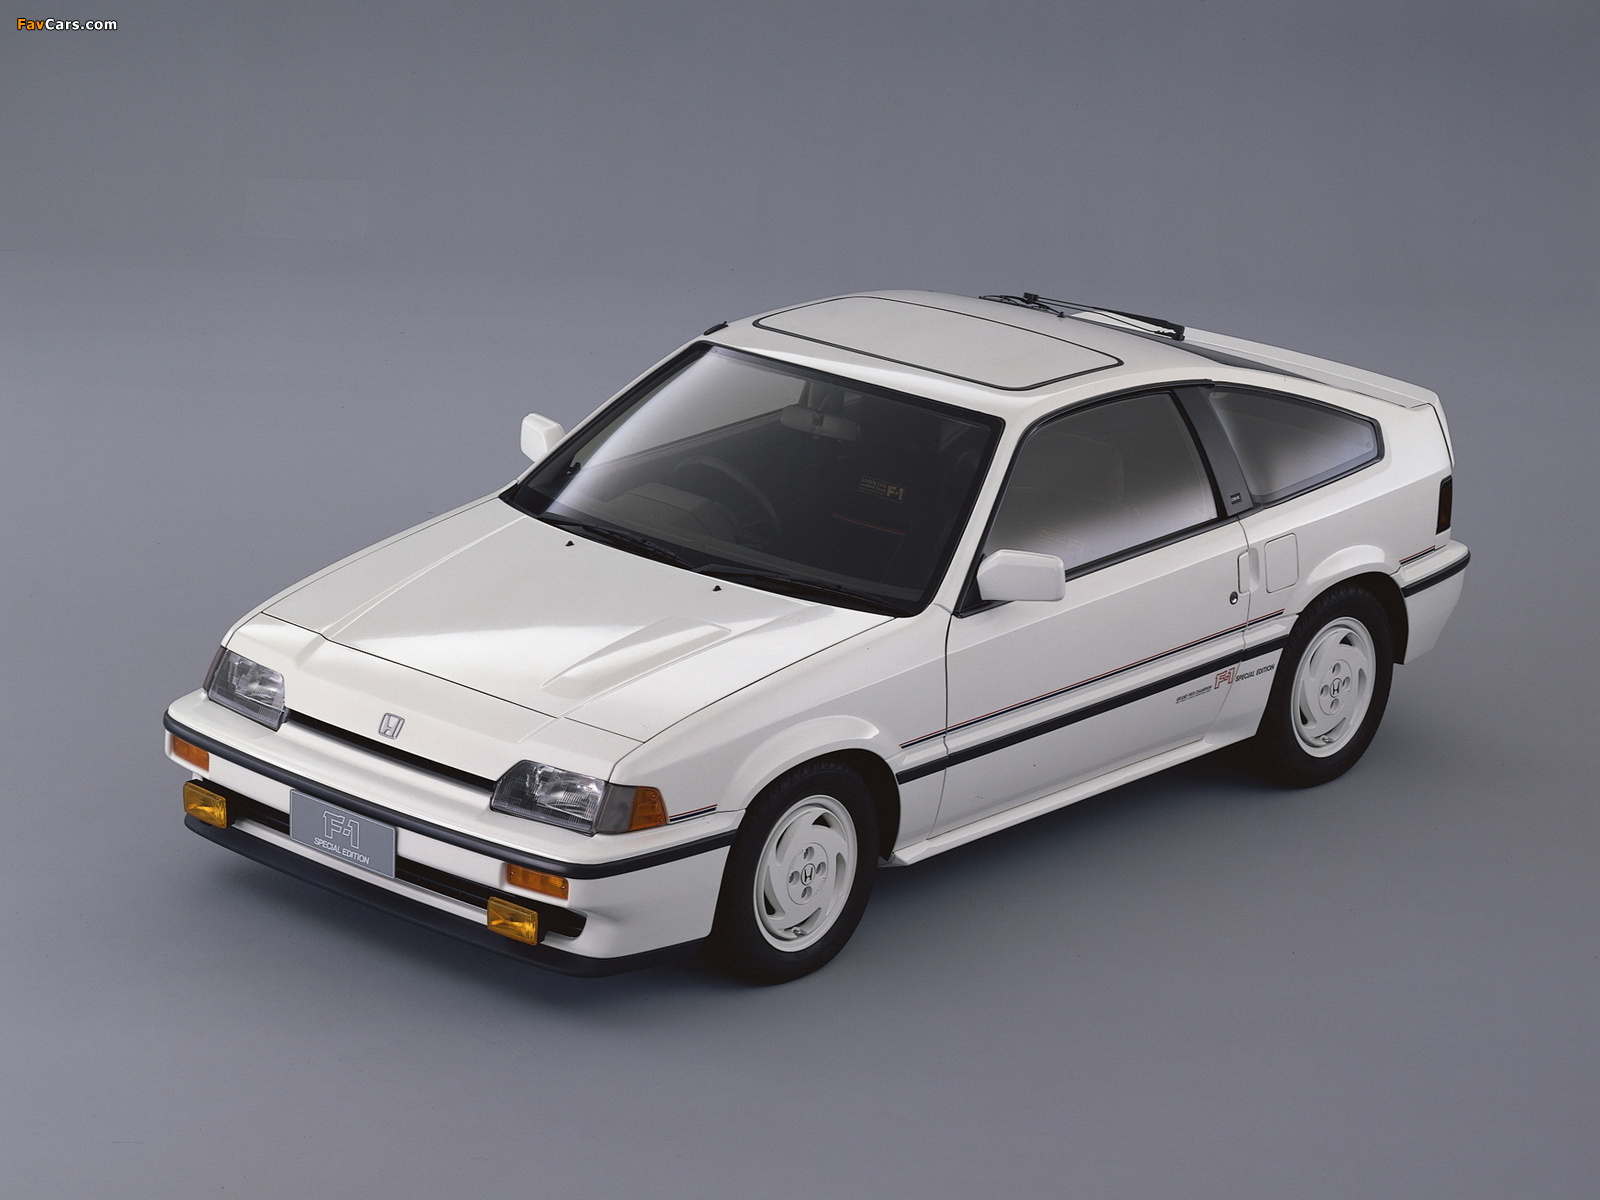 Honda Ballade Sports CR-X F1 Special Edition 1986 images (1600 x 1200)